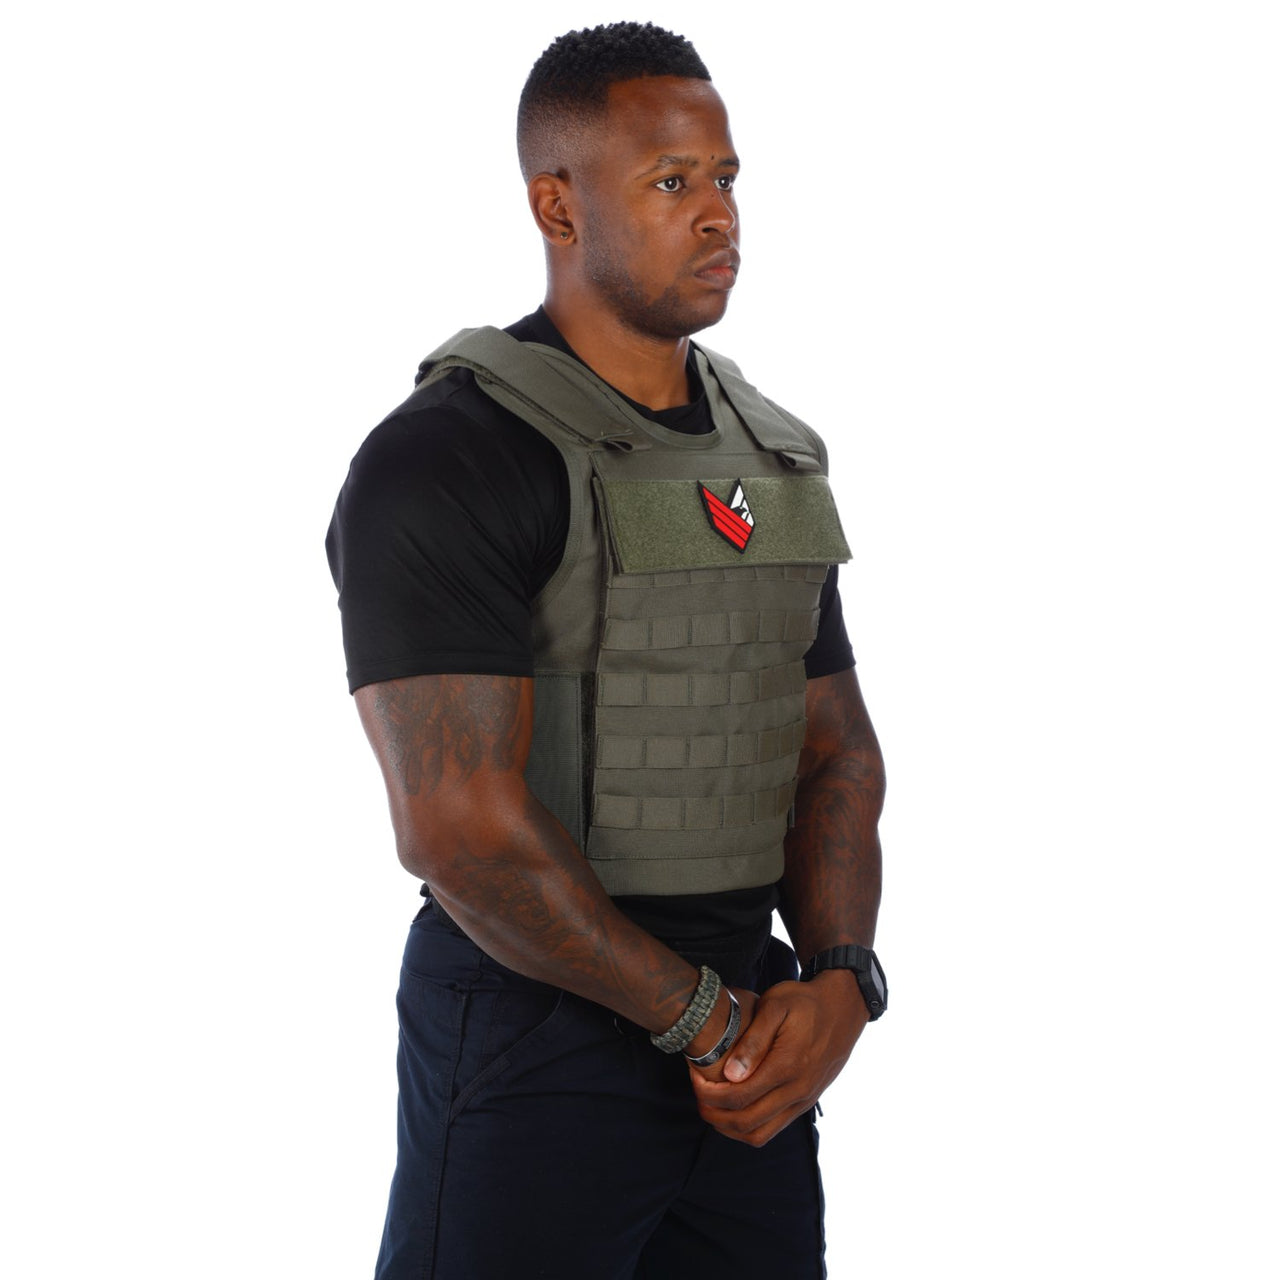 A man wearing the Body Armor Direct All Star Tactical Enhanced Multi-Threat Vest in front of a white background.